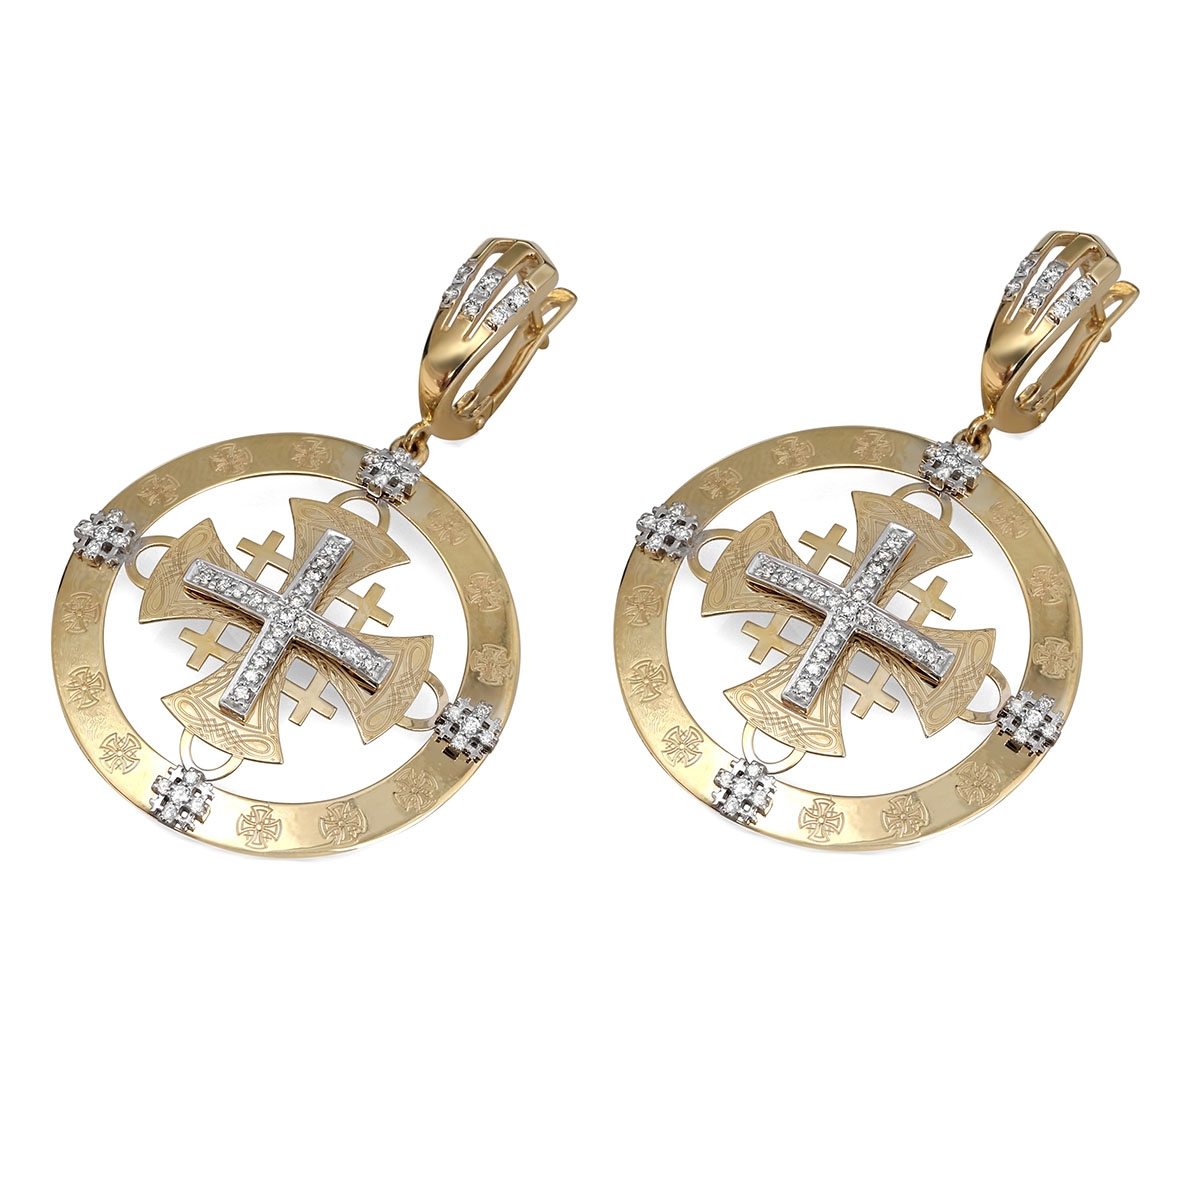 Anbinder Deluxe 14K Gold and Diamond Jerusalem Cross Hanging Disk Earrings with Celtic Knots and 94 Diamonds - 1